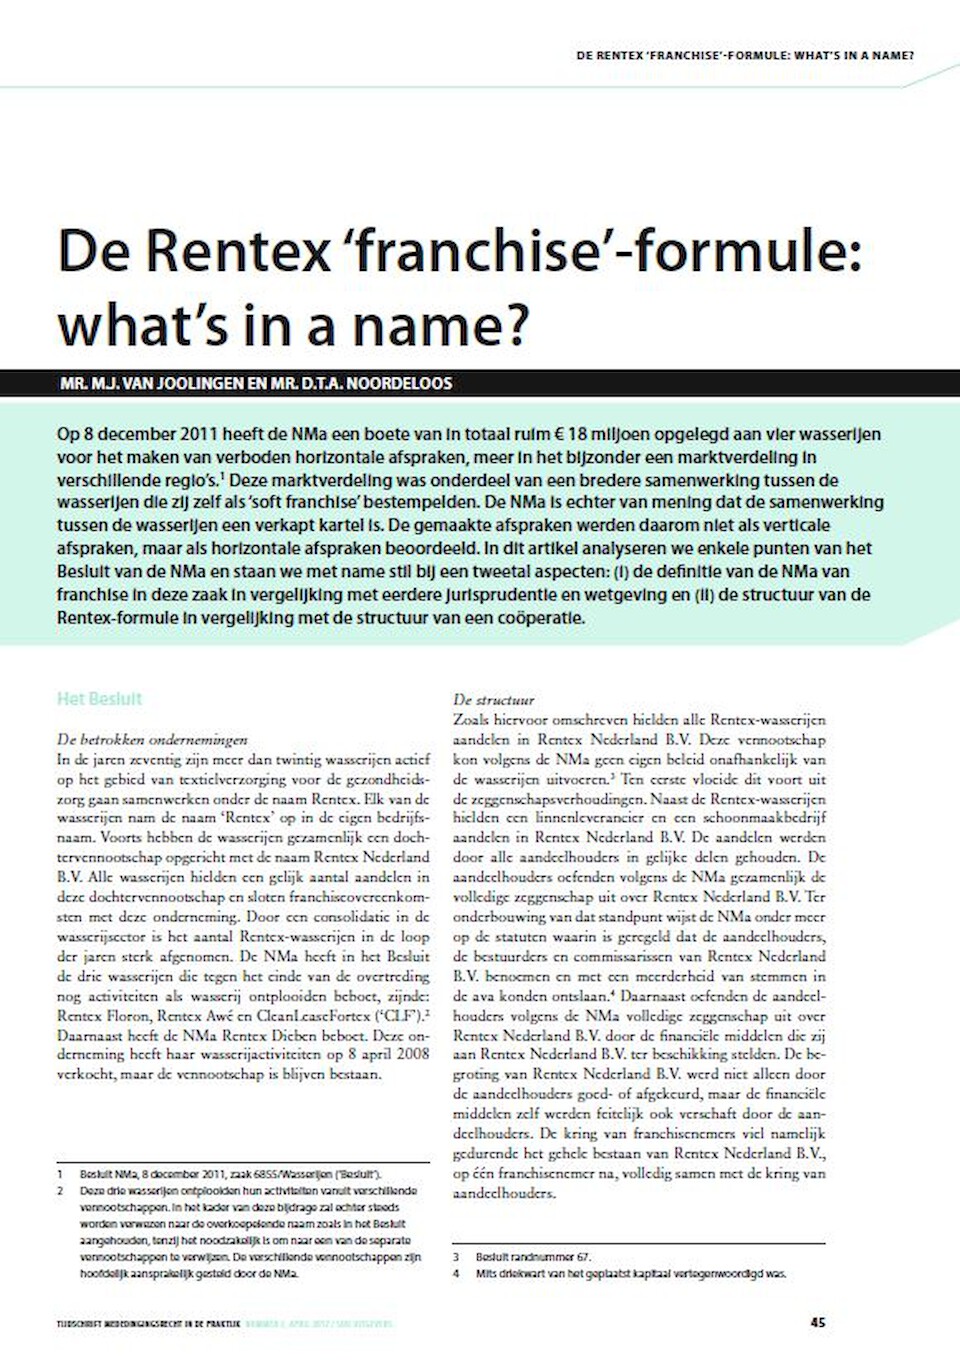 The Rentex ‘franchise’-formula: what’s in a name?